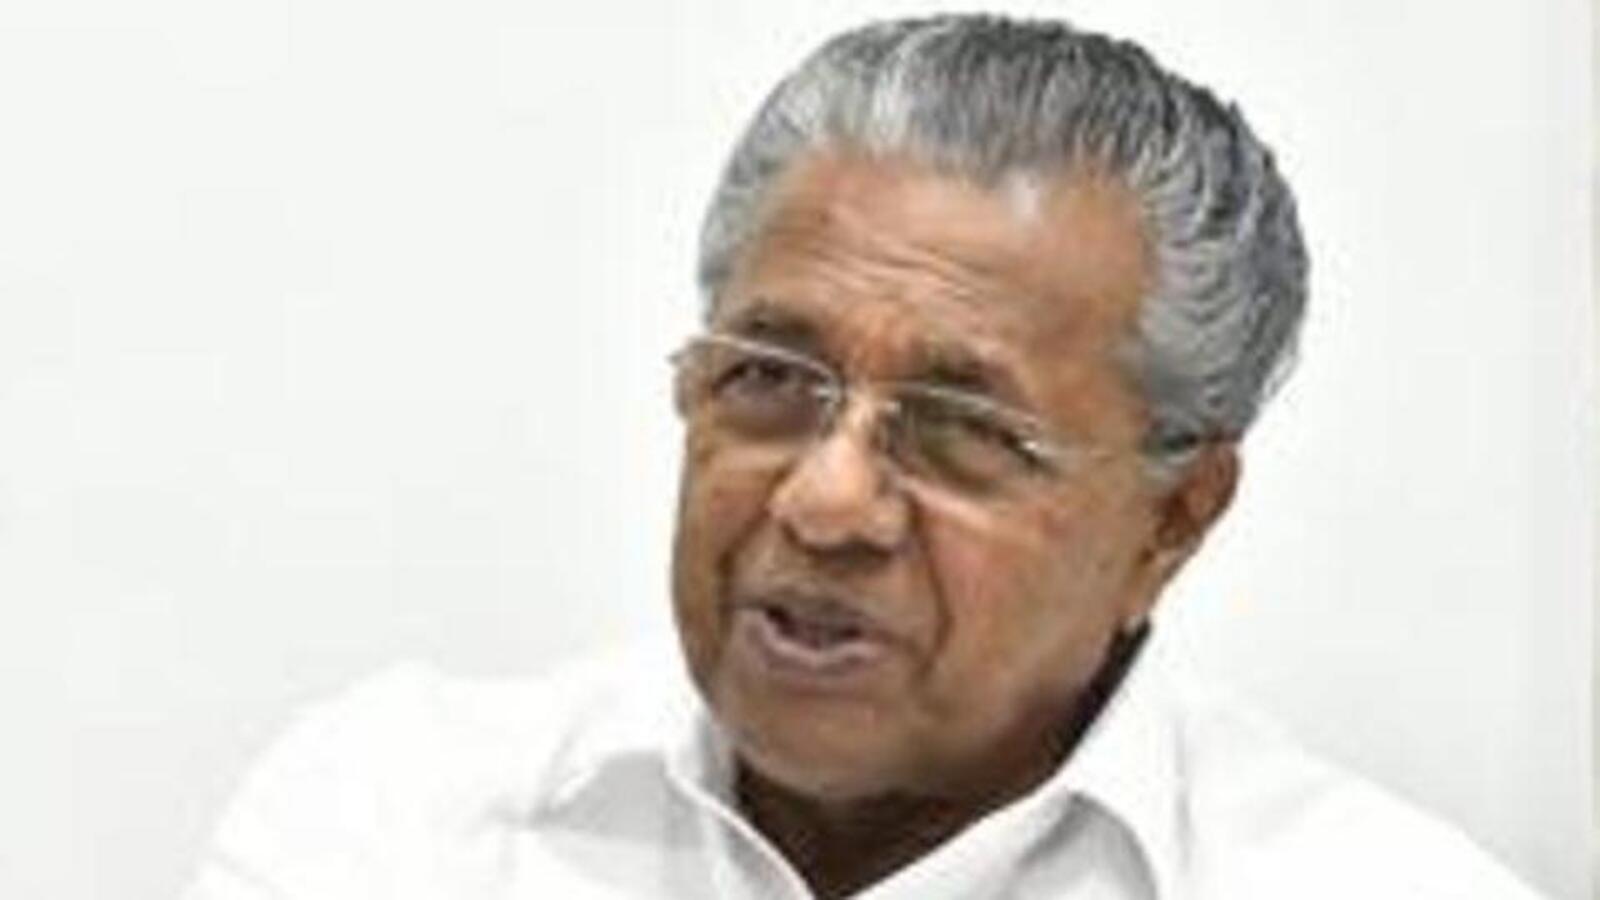 kerala-cm-accuses-governor-of-trying-to-supersede-powers-of-legislature